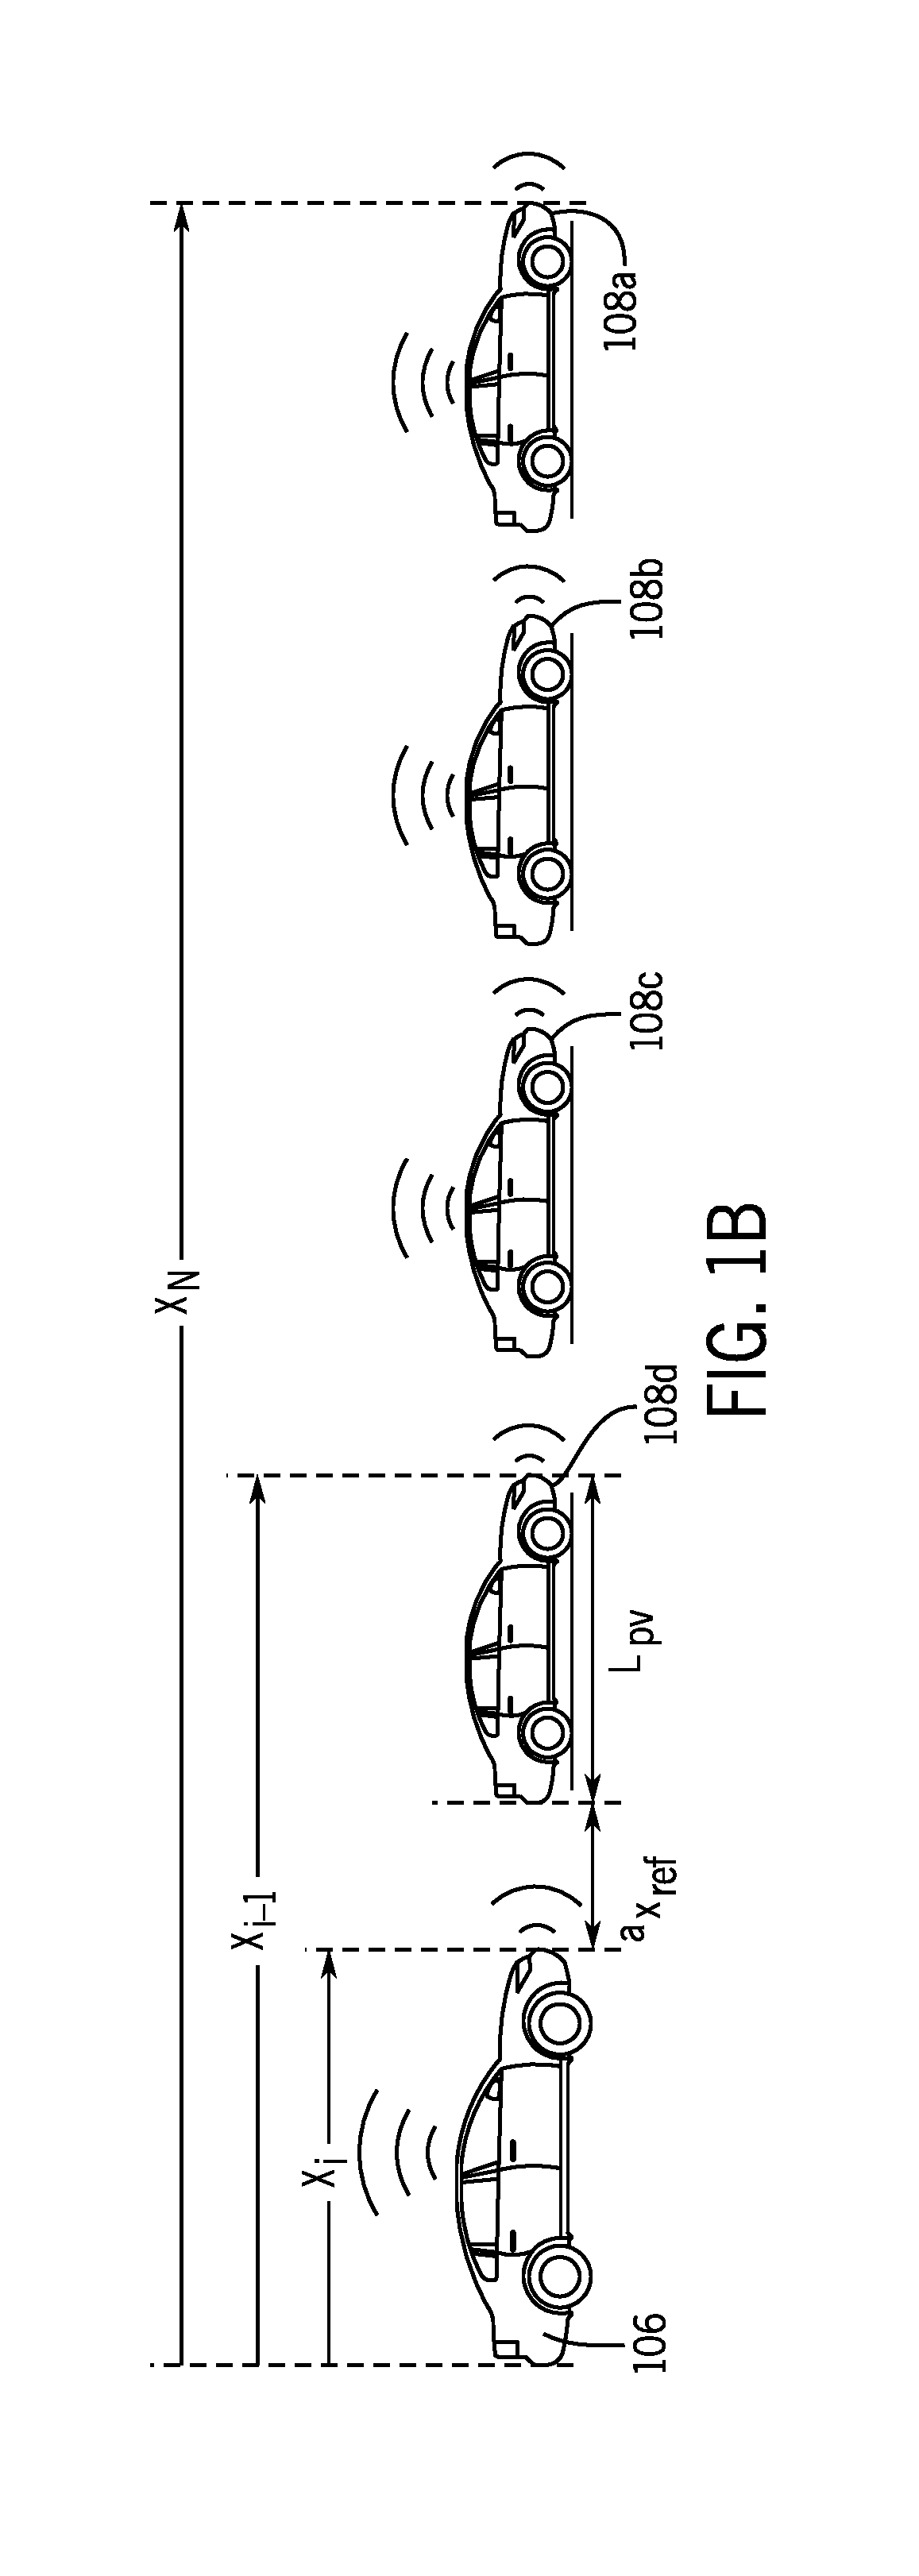 System and method for vehicle control in tailgating situations